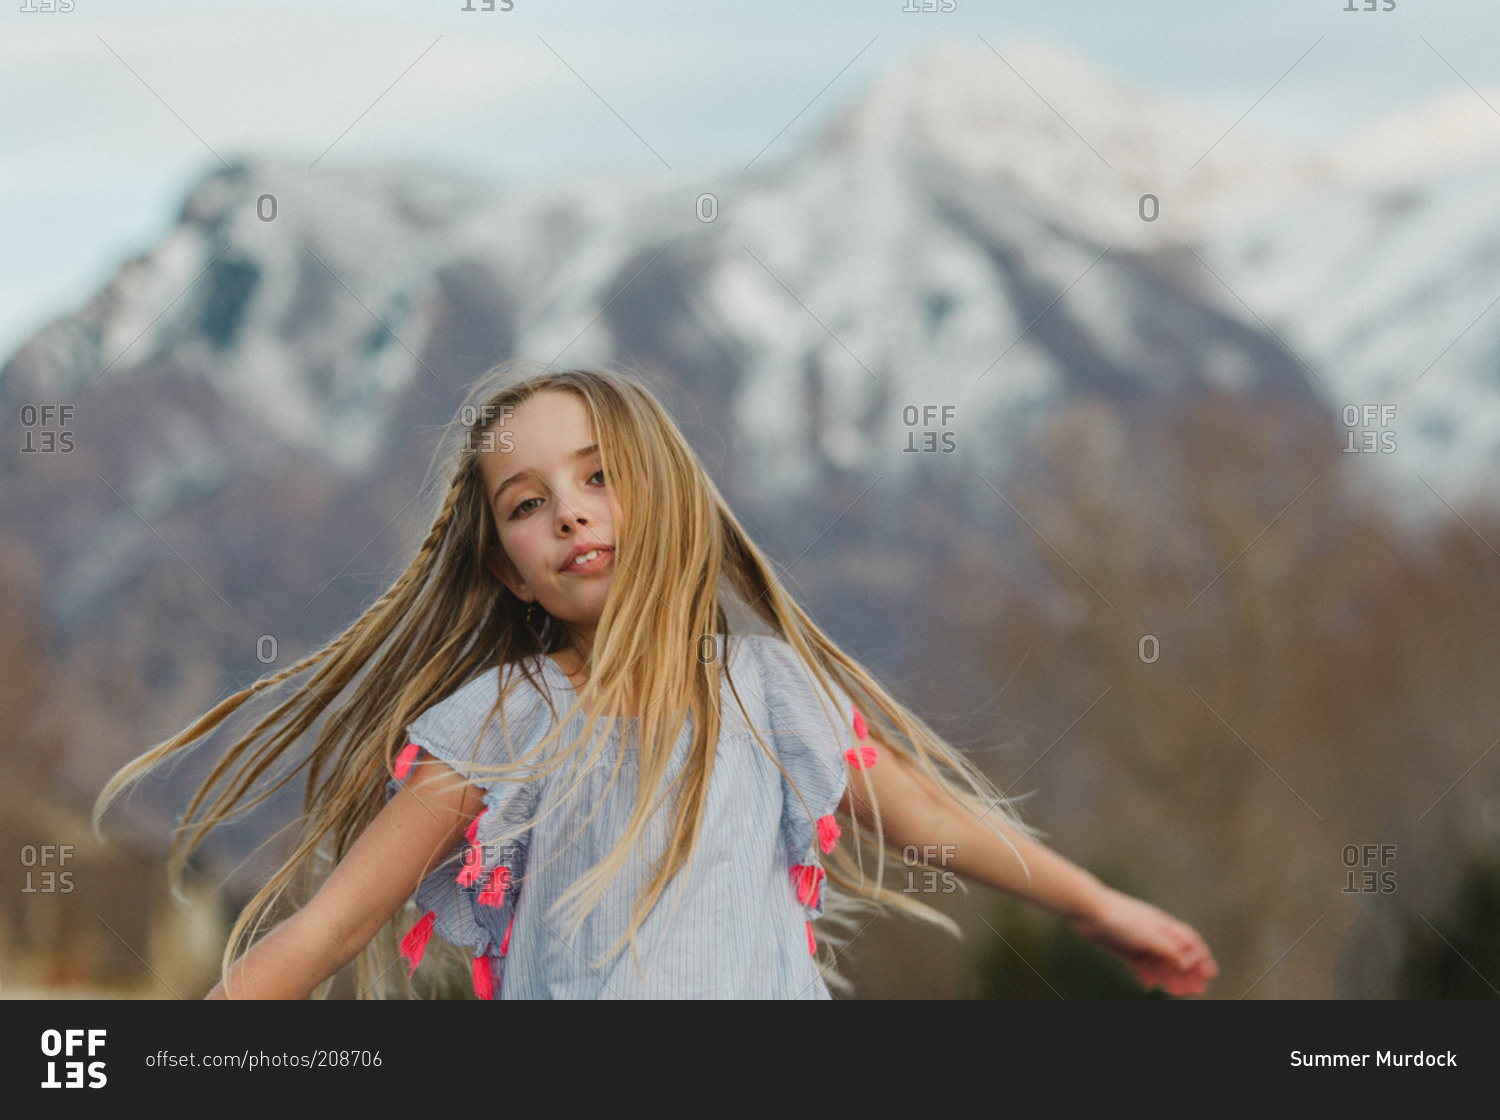 A girl spins around in front of snowcapped mountains